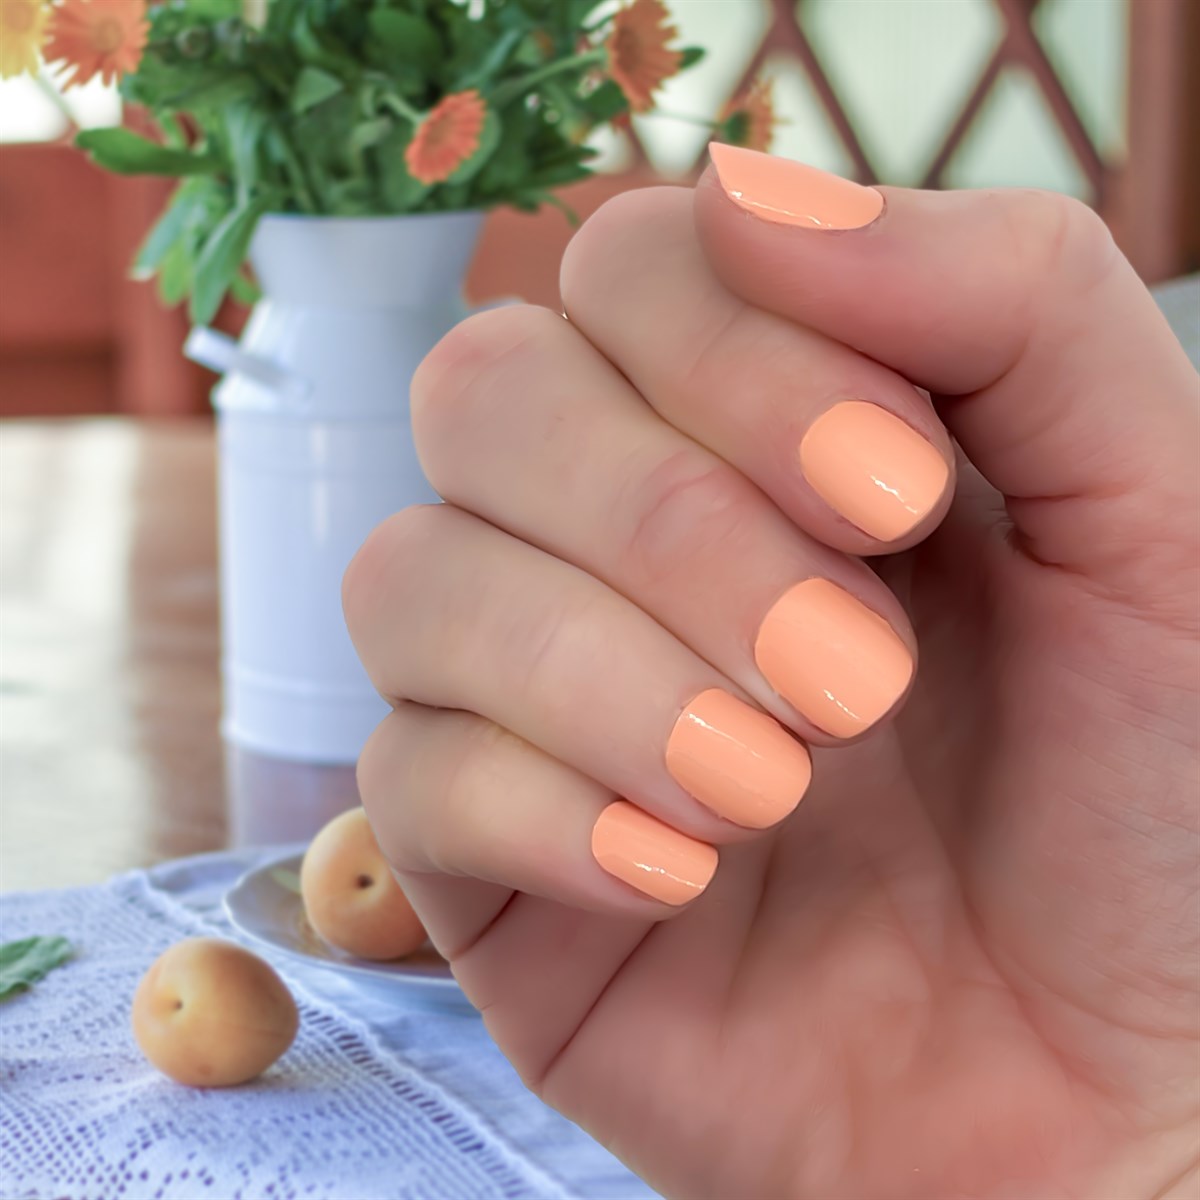 Buy DEBELLE GEL NAIL LACQUER APRICOT DEW PASTEL PINK NAIL POLISH Online   Get Upto 60 OFF at PharmEasy